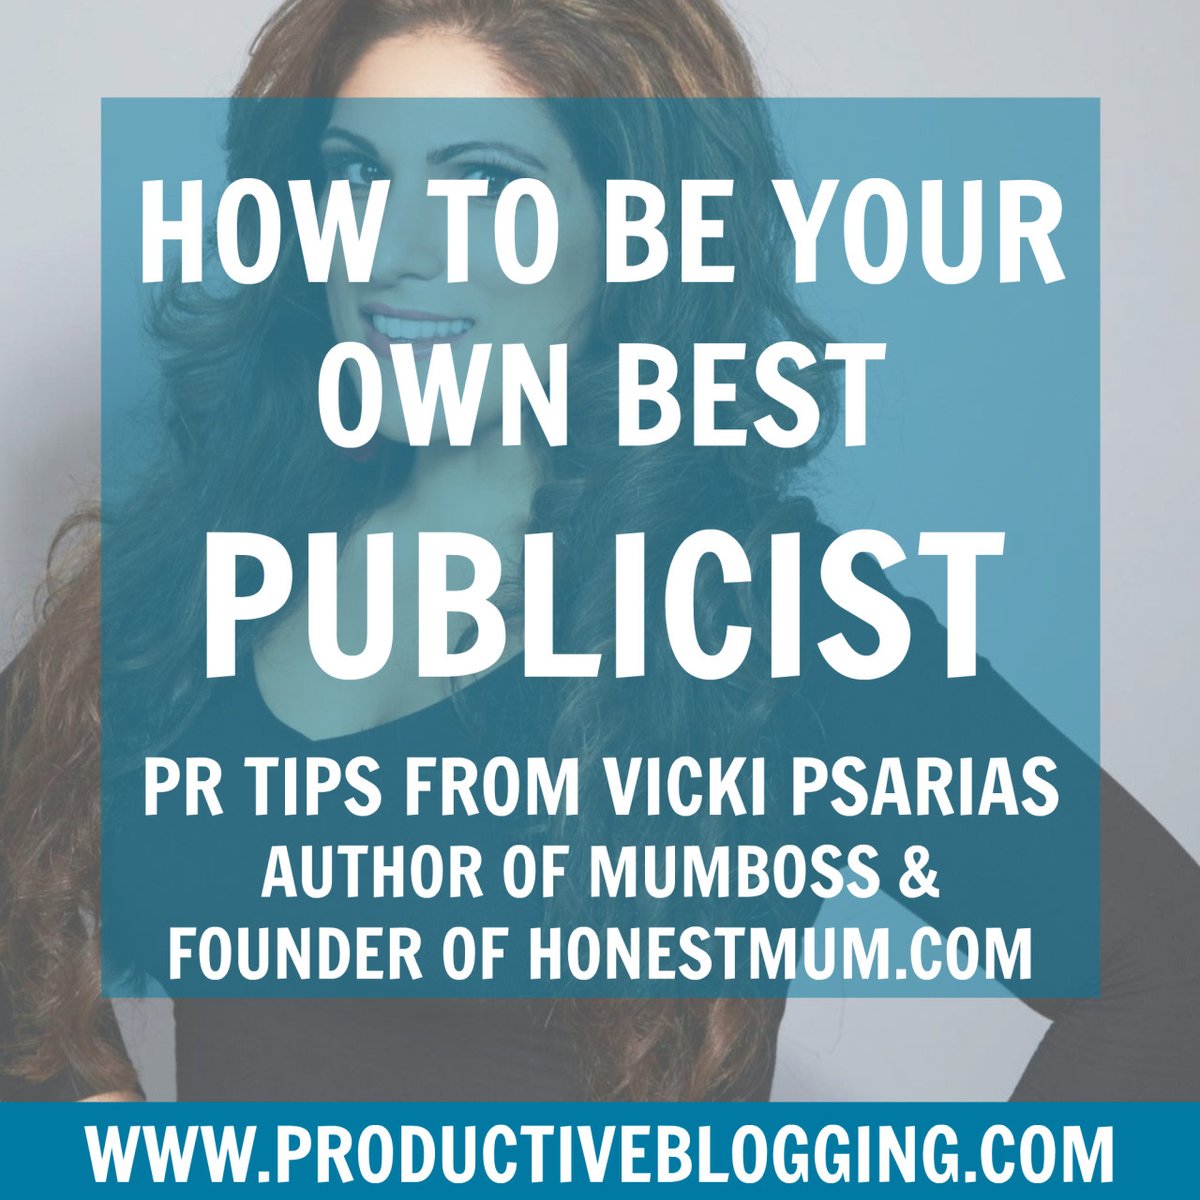 Who better to ask to share her PR wisdom on Productive Blogging, than @HonestMum AKA Vicki Psarias? Here are Vicki’s awesome tips on how to be your own best publicist: bit.ly/2M48FOI #mumboss #mumbossbook #honestmum #vickipsarias #publicist #prtips #productiveblogging